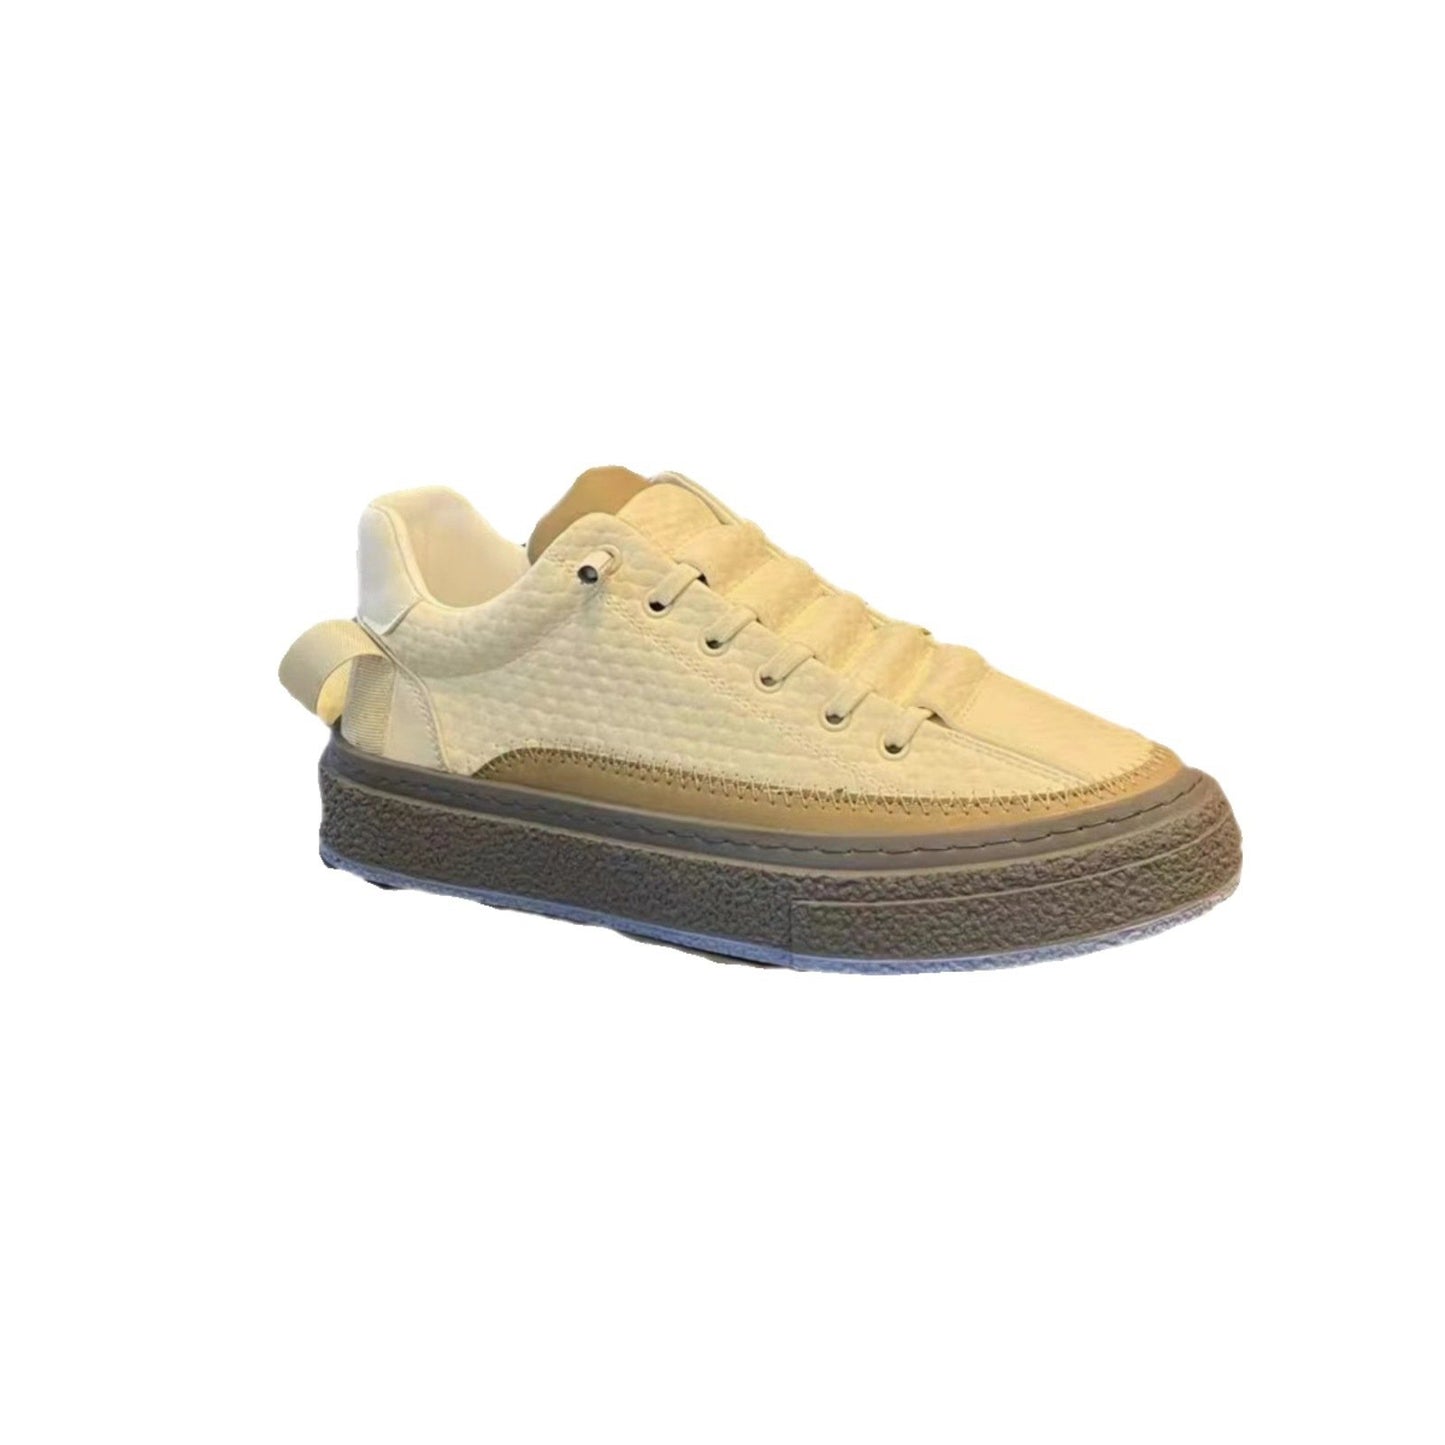 Handmade stain-resistant fashionable casual non-slip all-match shoes